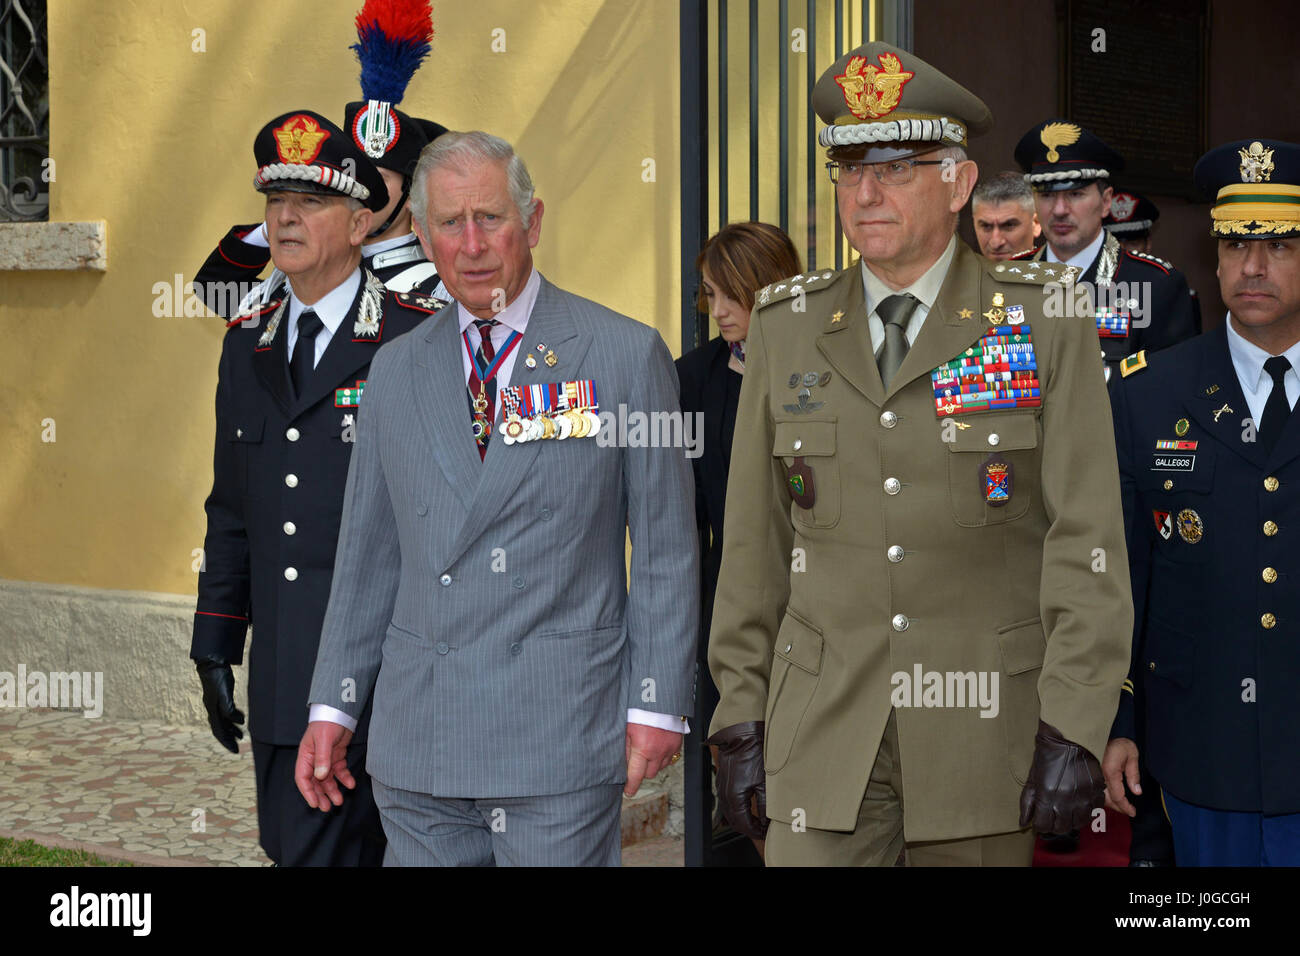 The Royal Highness, Prince Charles, Prince of Wales (center), Gen. Claudio Graziano, Italian Army Chief of Staff (right) and Gen. Tullio Del Sette, Italian Carabinieri General Commander (left), receive the salute of honor at the end visit at Center of Excellence for Stability Police Units (CoESPU) Vicenza, Italy, April 1, 2017. (U.S. Army Photo by Visual Information Specialist Antonio Bedin/released) Stock Photo